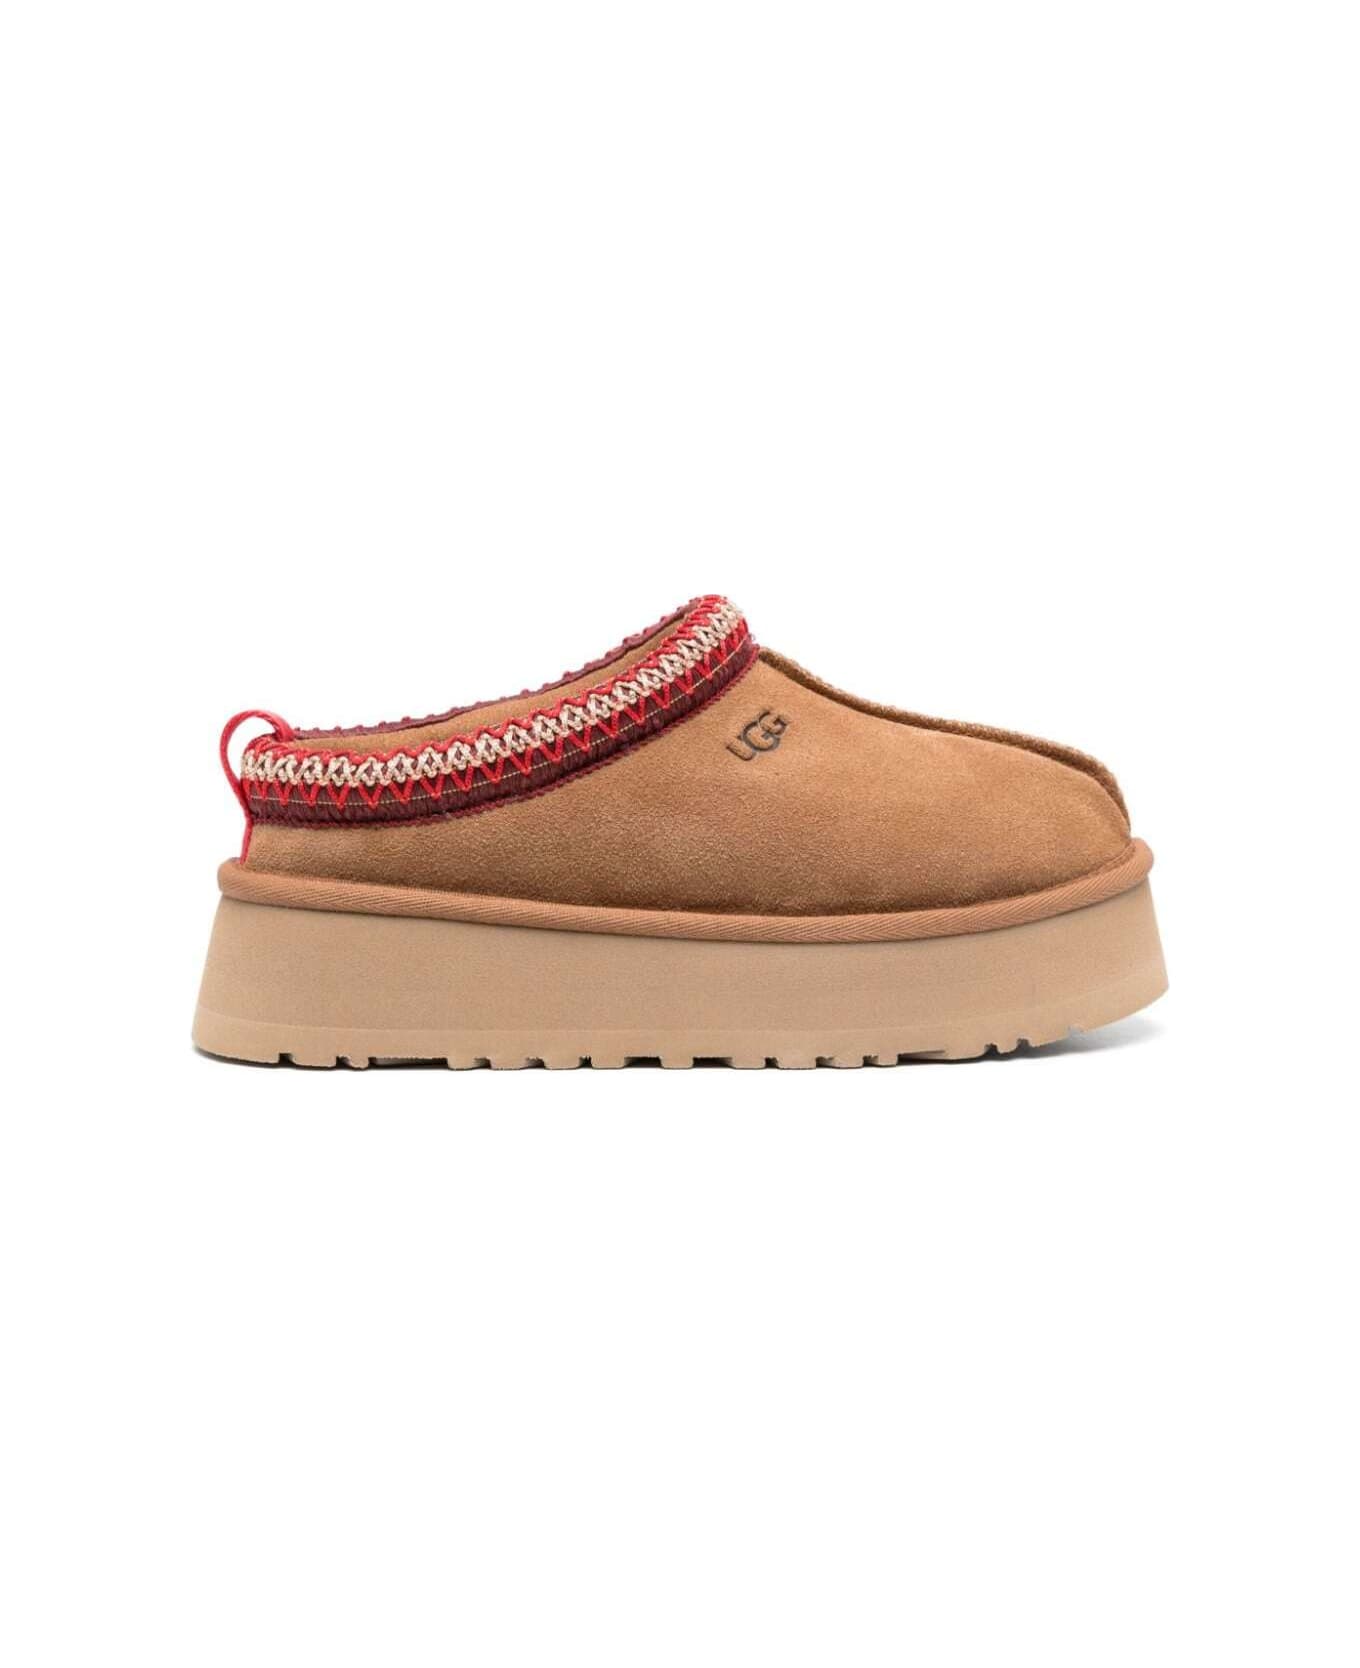 UGG Beige Slipper With Logo Embroidery In Suede Woman - Beige